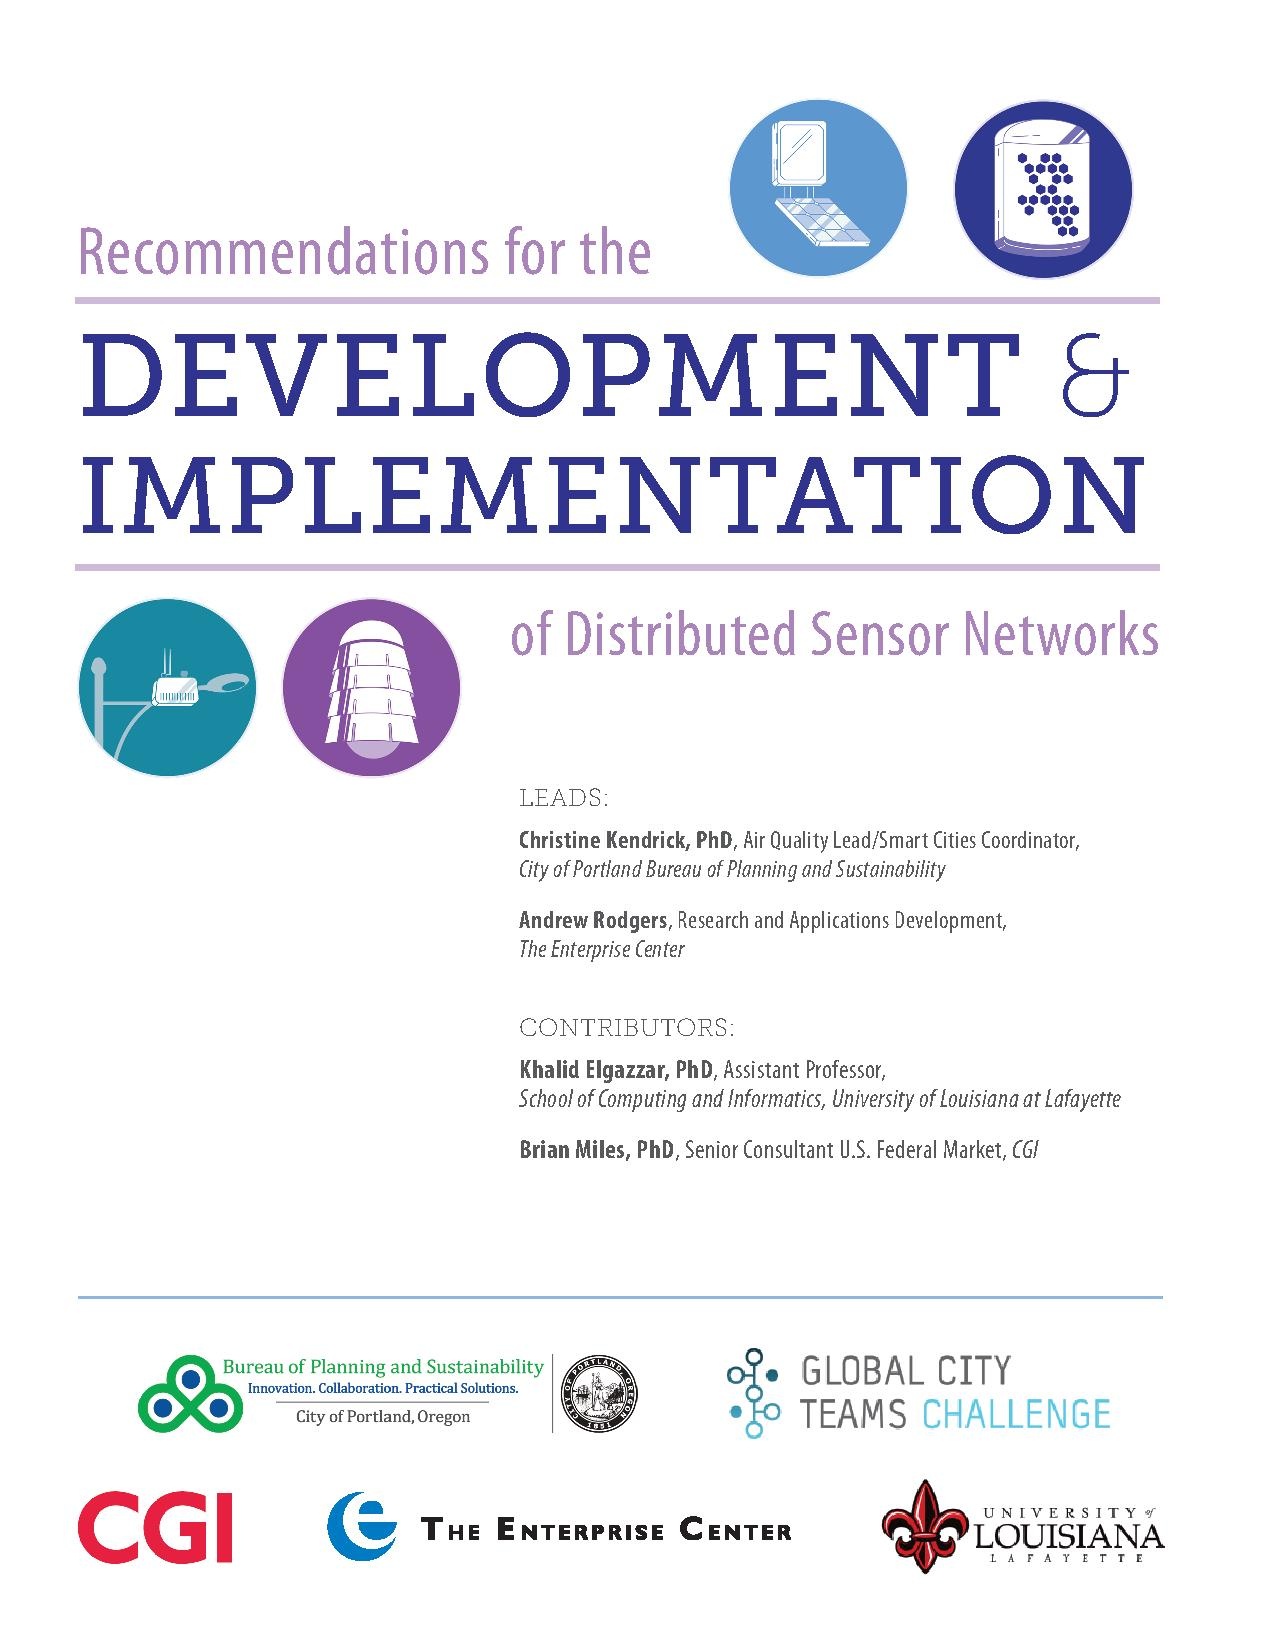 Recommendations for the Development & Implementation of Distributed Sensor Networks